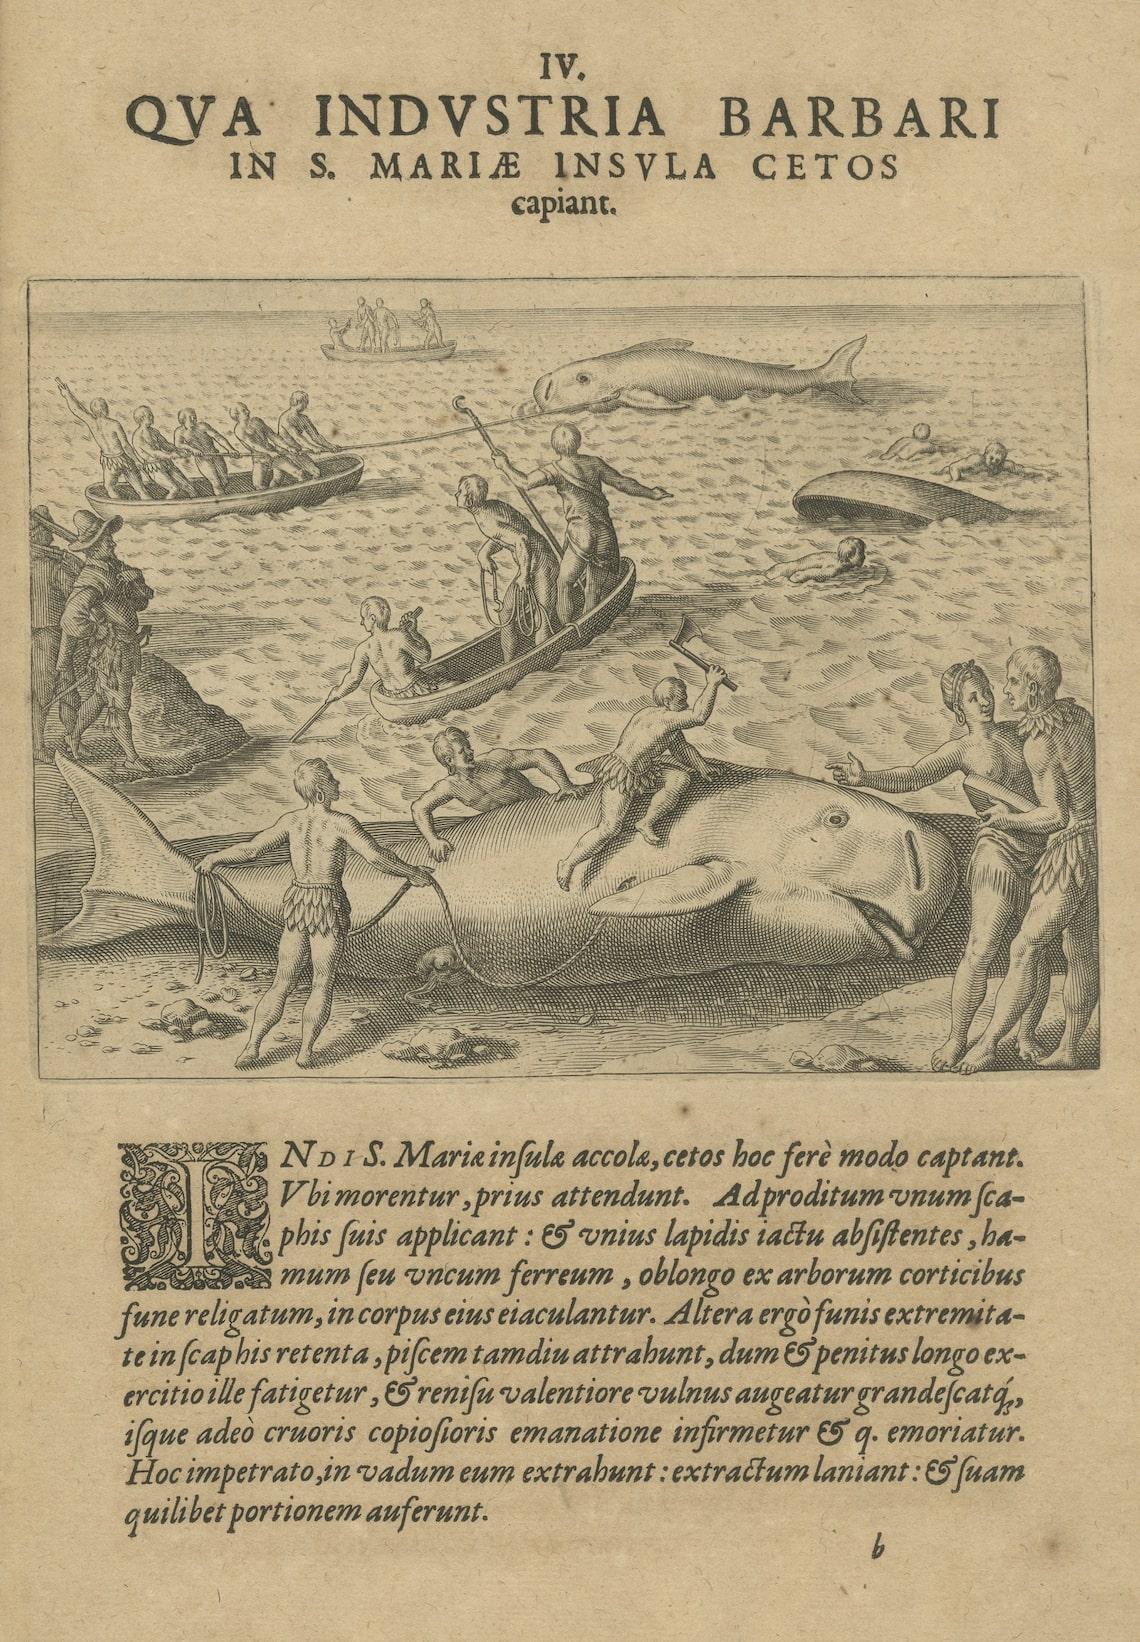 Original Antique engraving by Theodore De Bry from 'Pars Quarta Indiae Orientalis...,' 1601,  with descriptive latin text below the image.

This 1601 engraving presents an intriguing scene of marine harvest, depicting the industrious efforts of